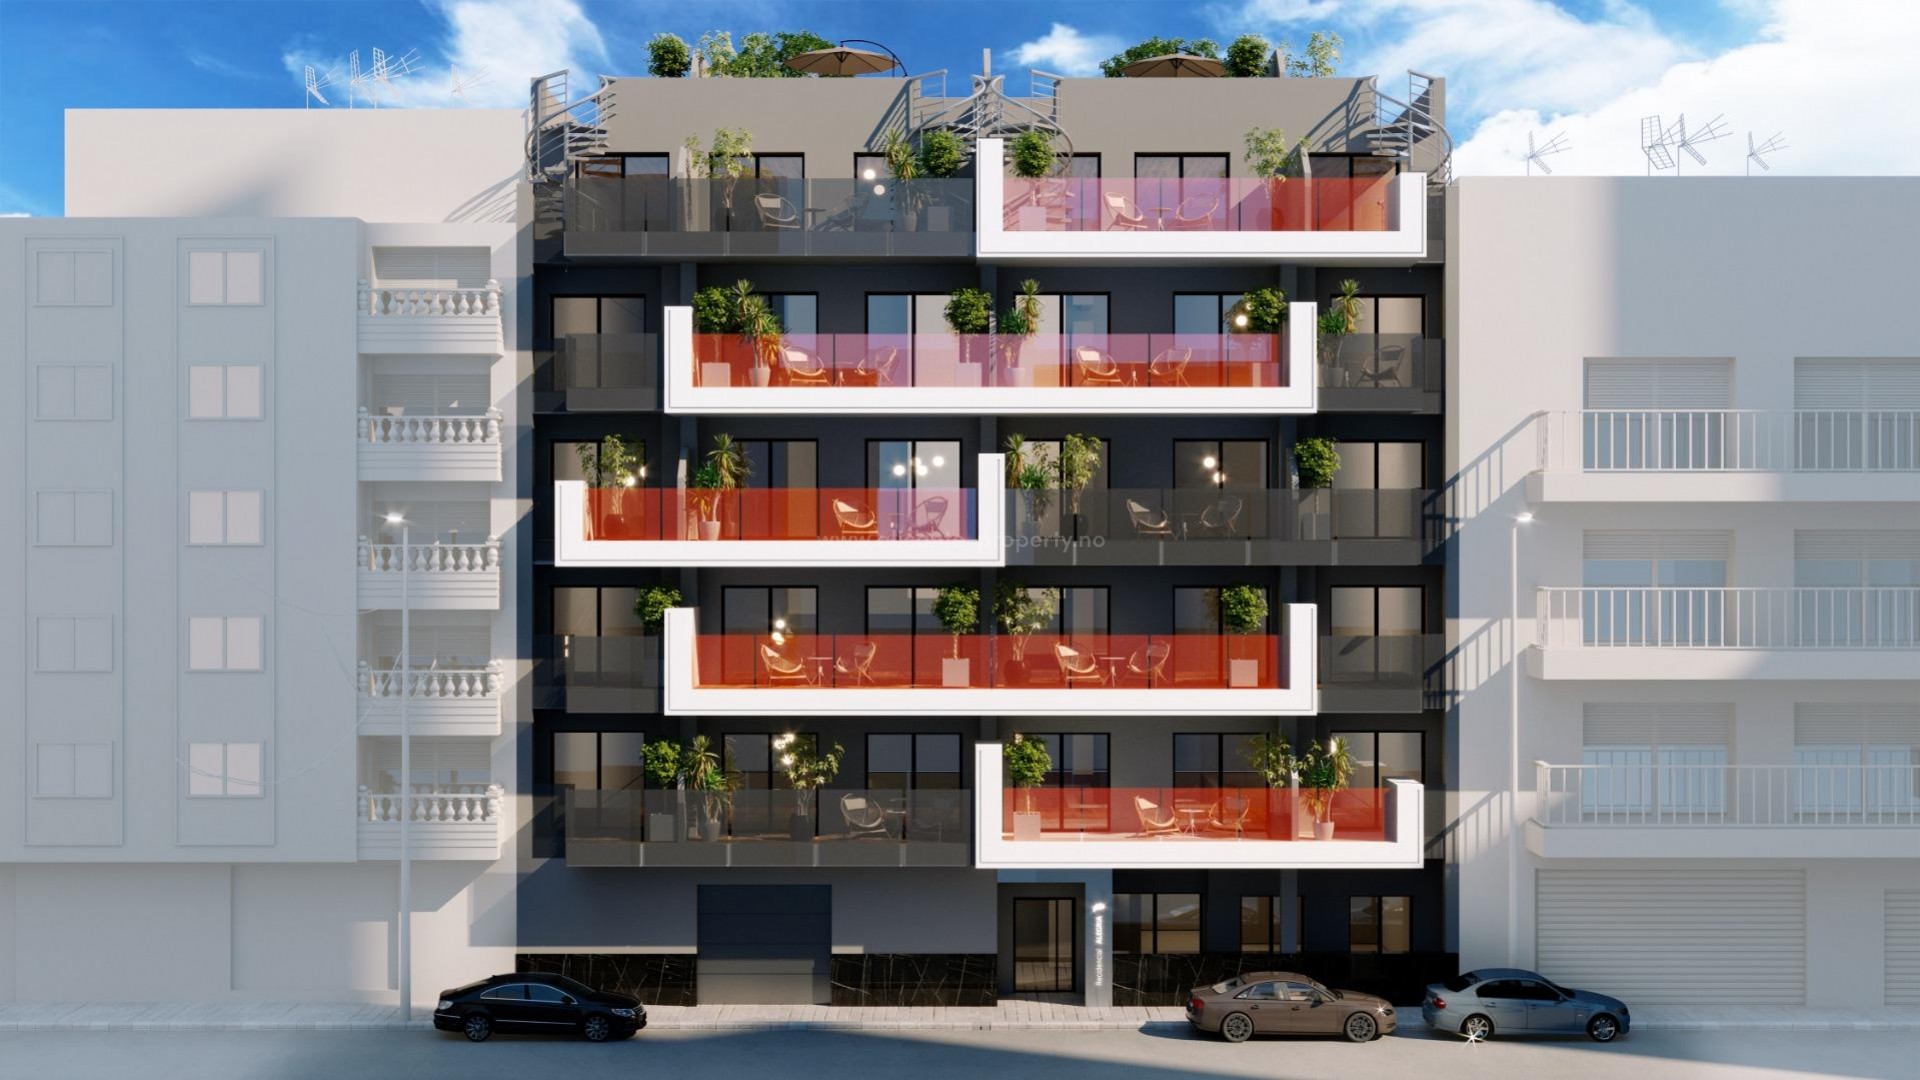 New homes in Torrevieja, 21 apartments/penthouses, 2/3 bedrooms, 2 bathrooms, large terraces, communal swimming pool and sauna, underground parking